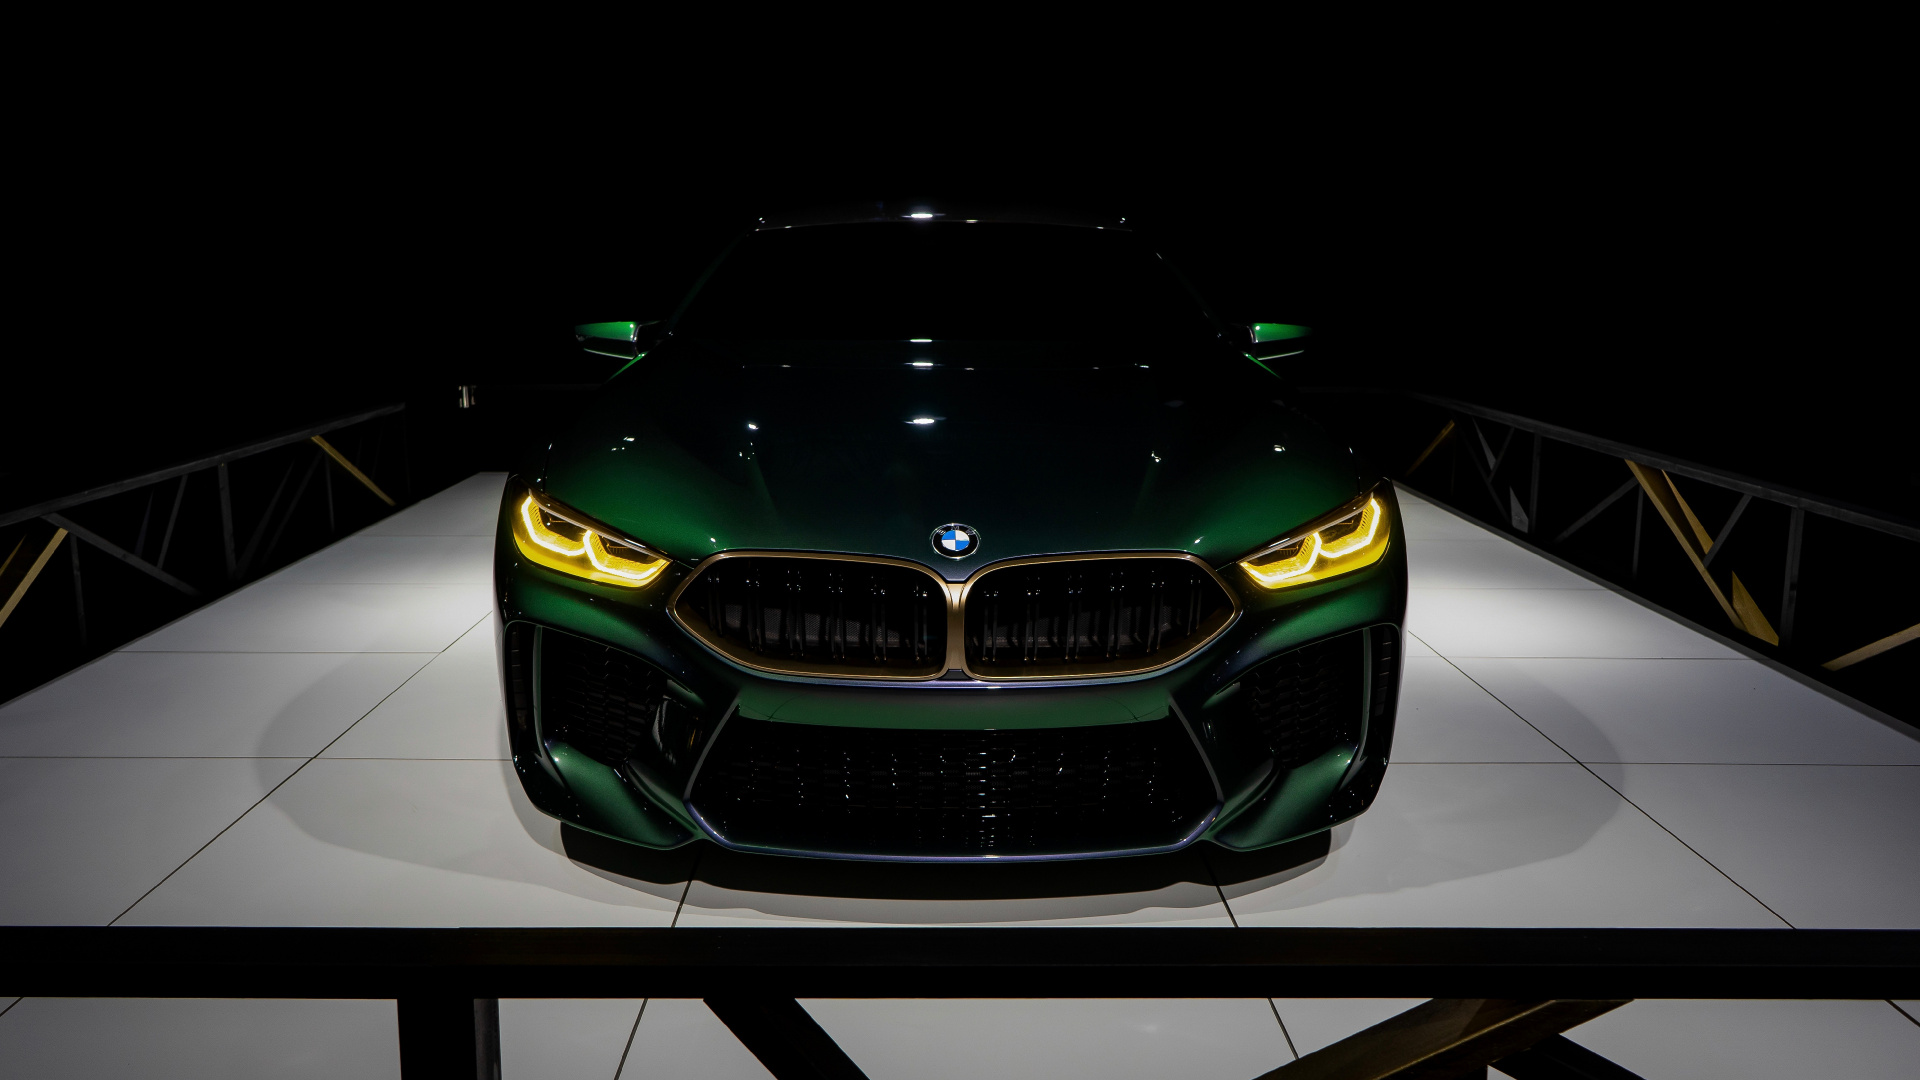 Green Bmw m 3 Coupe. Wallpaper in 1920x1080 Resolution